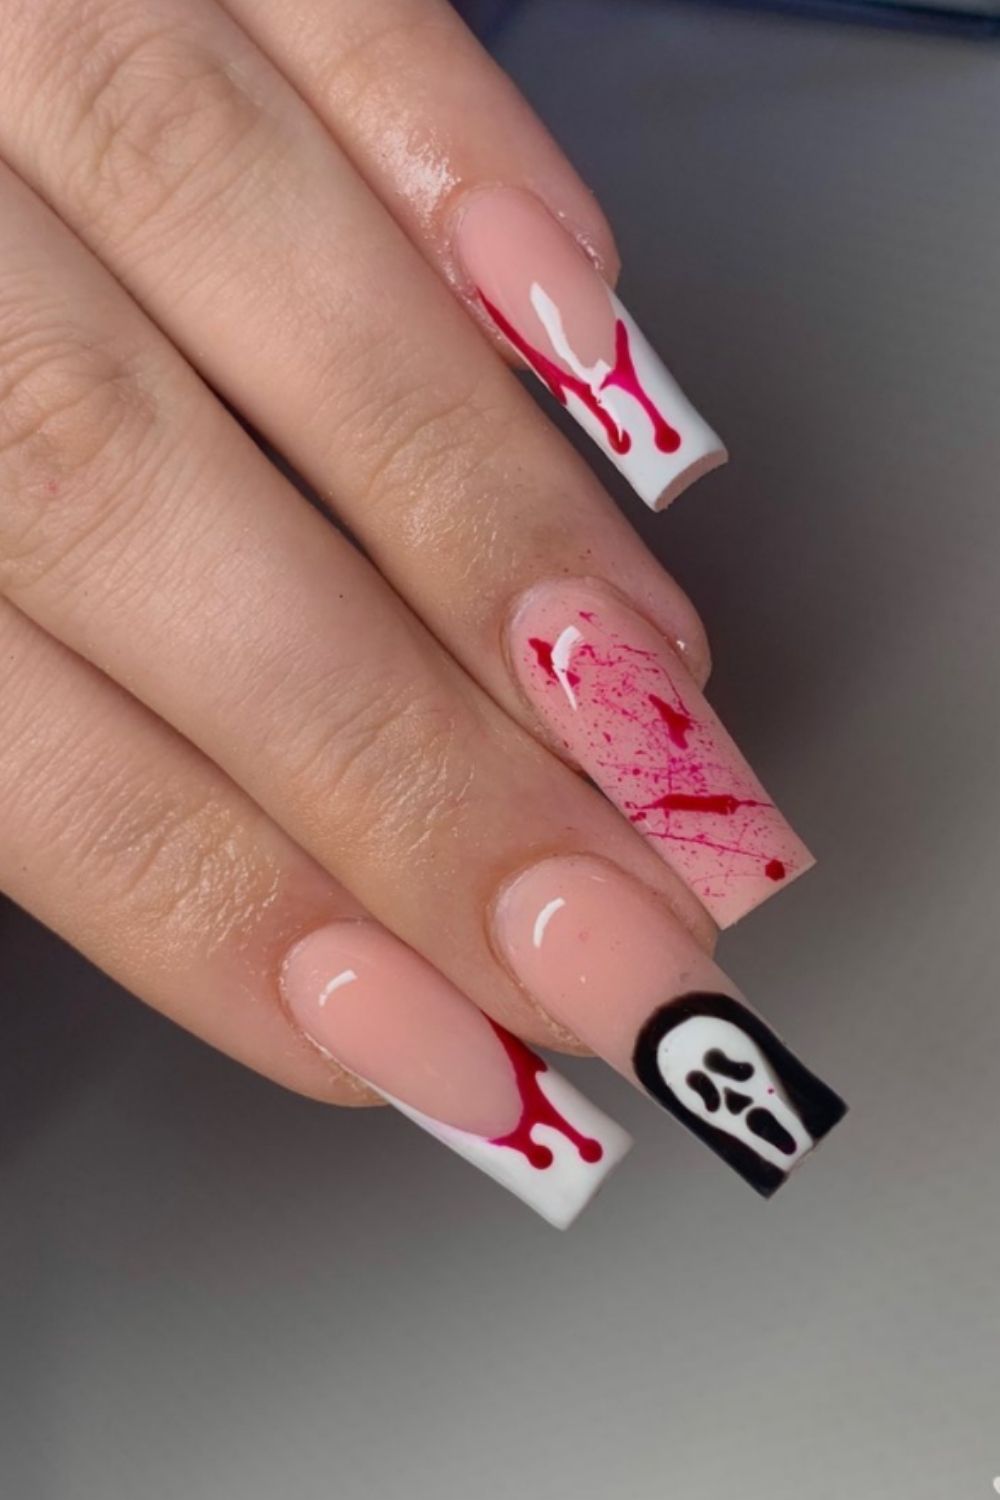 Bloody Nail Designs – With Blood Drops, Wounds, Knives